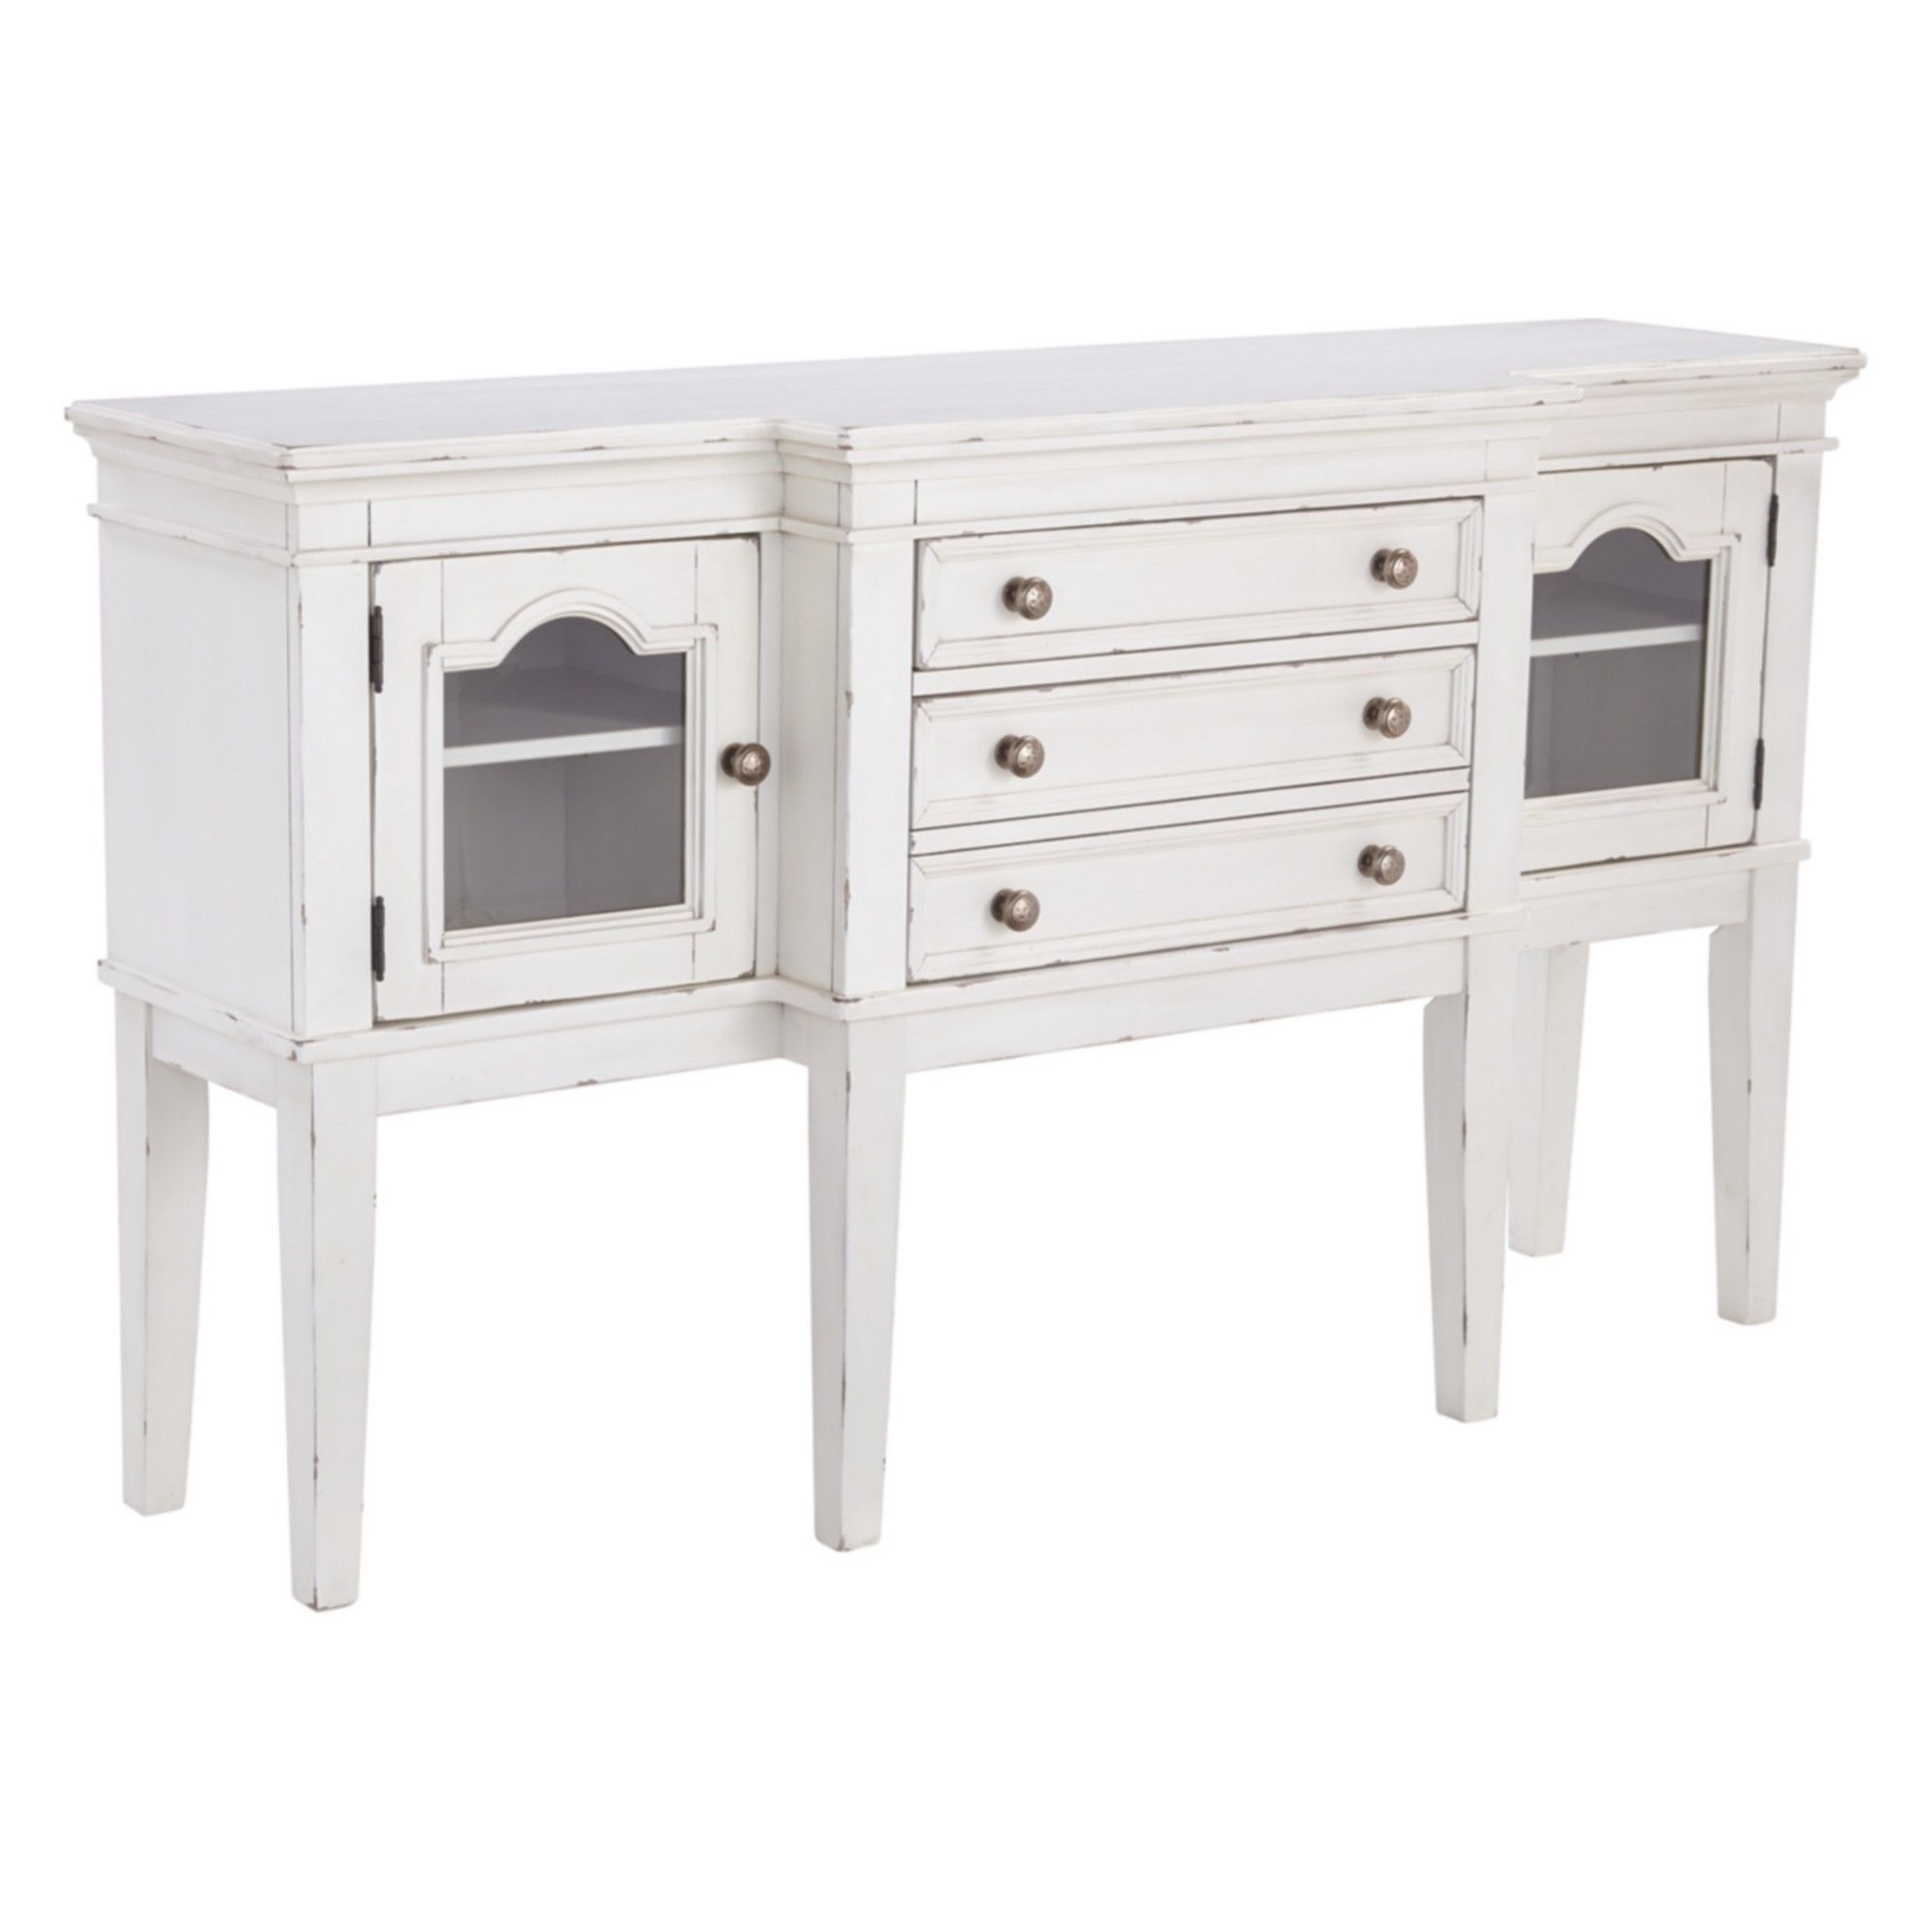 Danbeck Dining Room Server Chipped White – Signature Design With Tiphaine Sideboards (View 25 of 30)